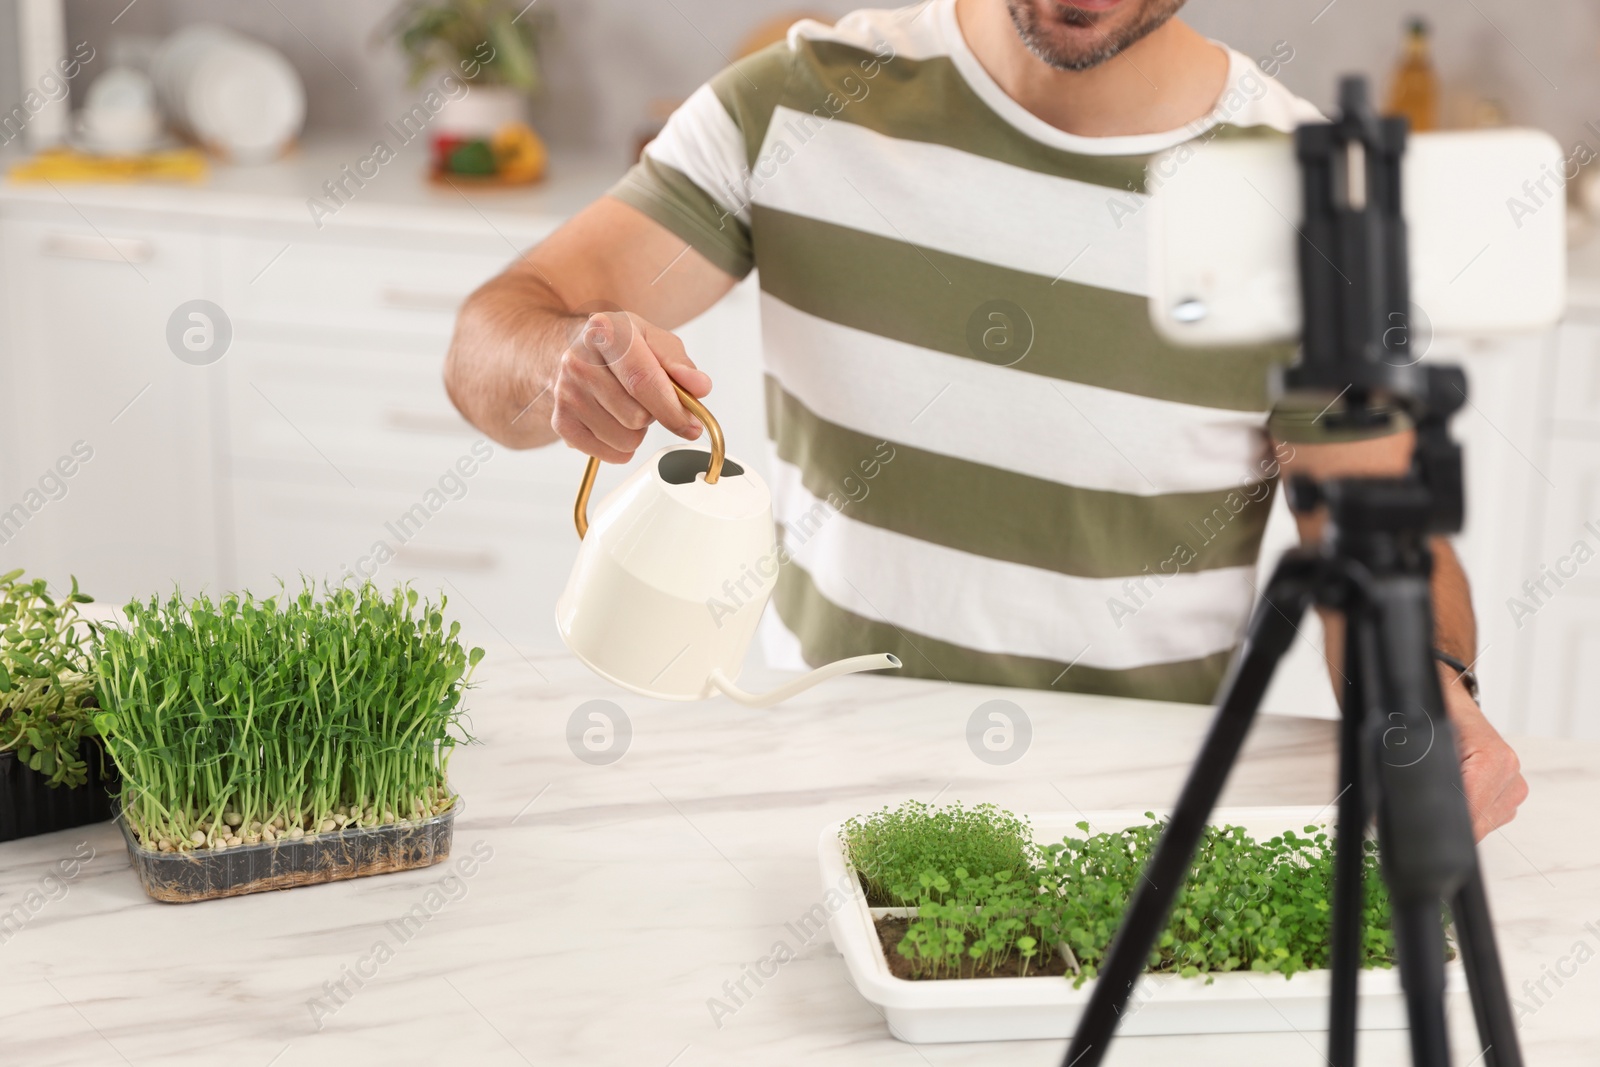 Photo of Teacher with microgreens and watering can conducting online course in kitchen, closeup. Time for hobby